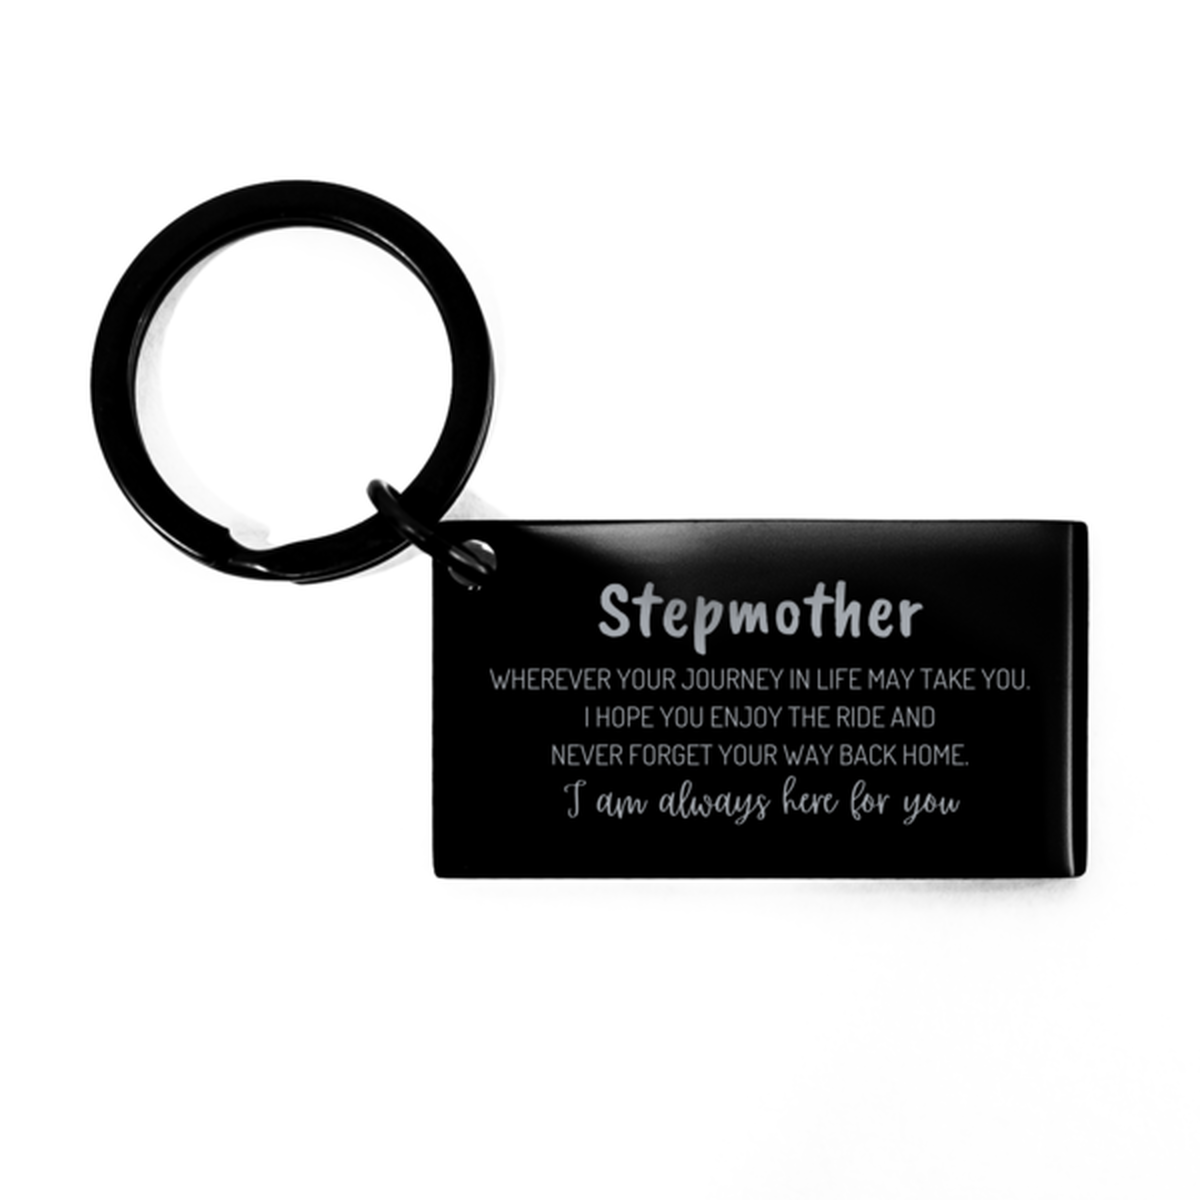 Stepmother wherever your journey in life may take you, I am always here for you Stepmother Keychain, Awesome Christmas Gifts For Stepmother, Stepmother Birthday Gifts for Men Women Family Loved One